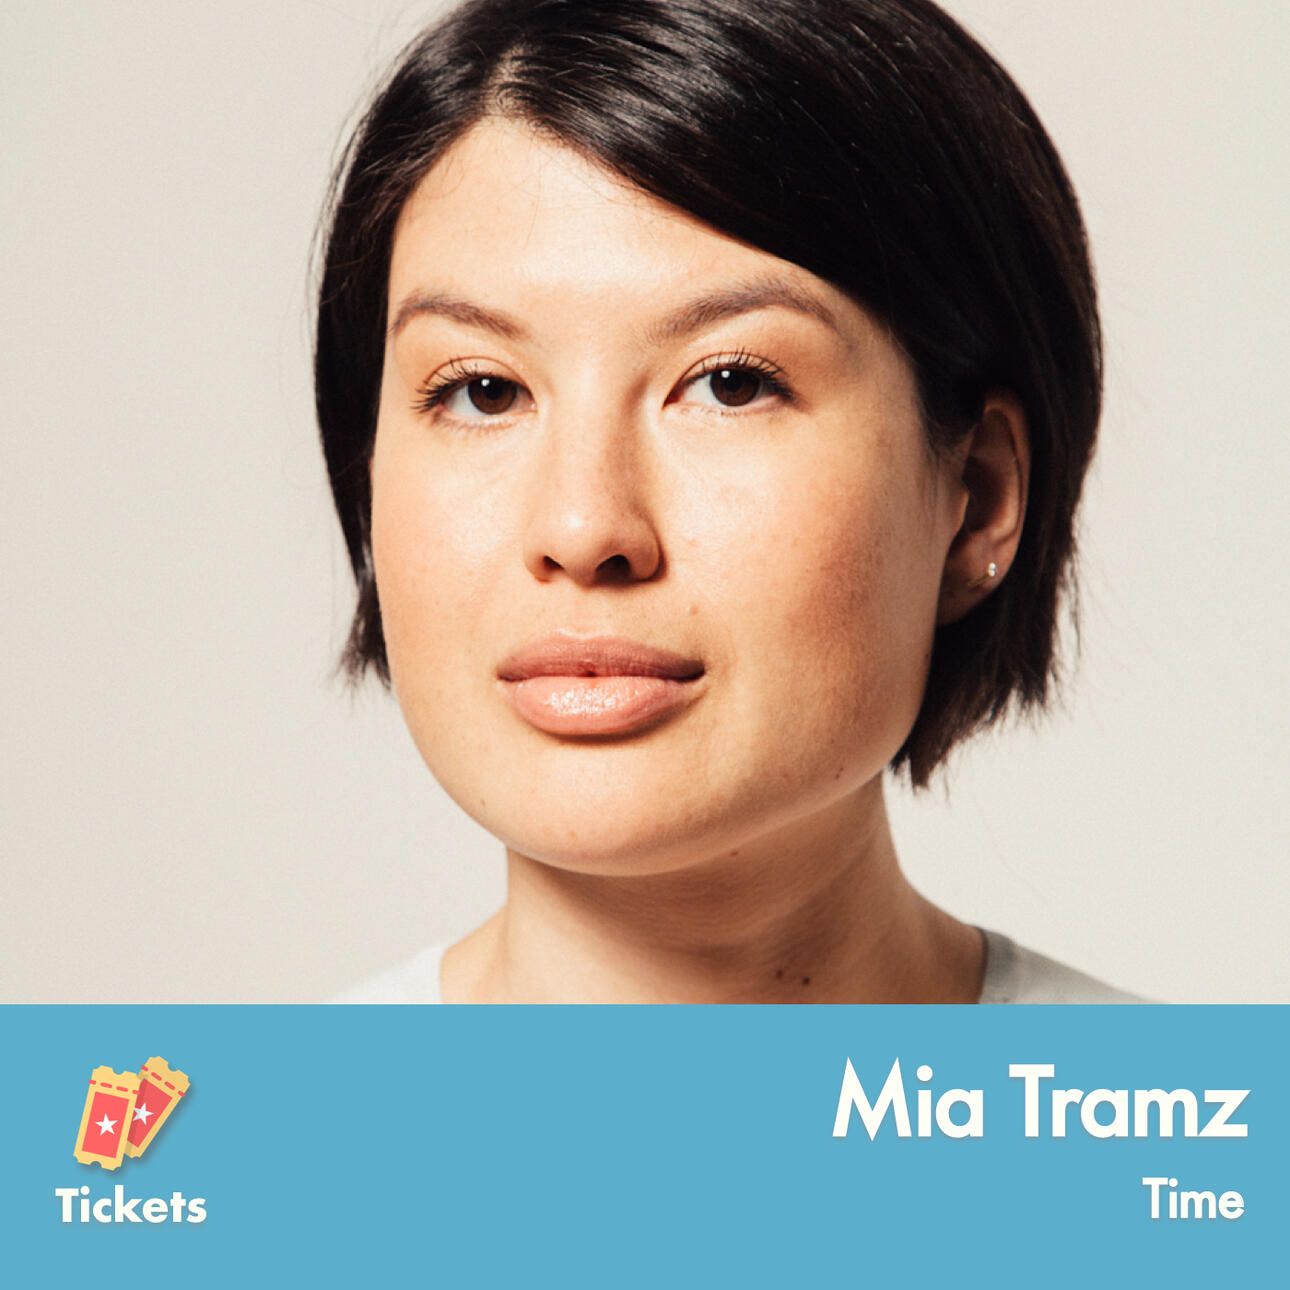 Tickets Podcast: Storytelling in VR with Time's Mia Tramz